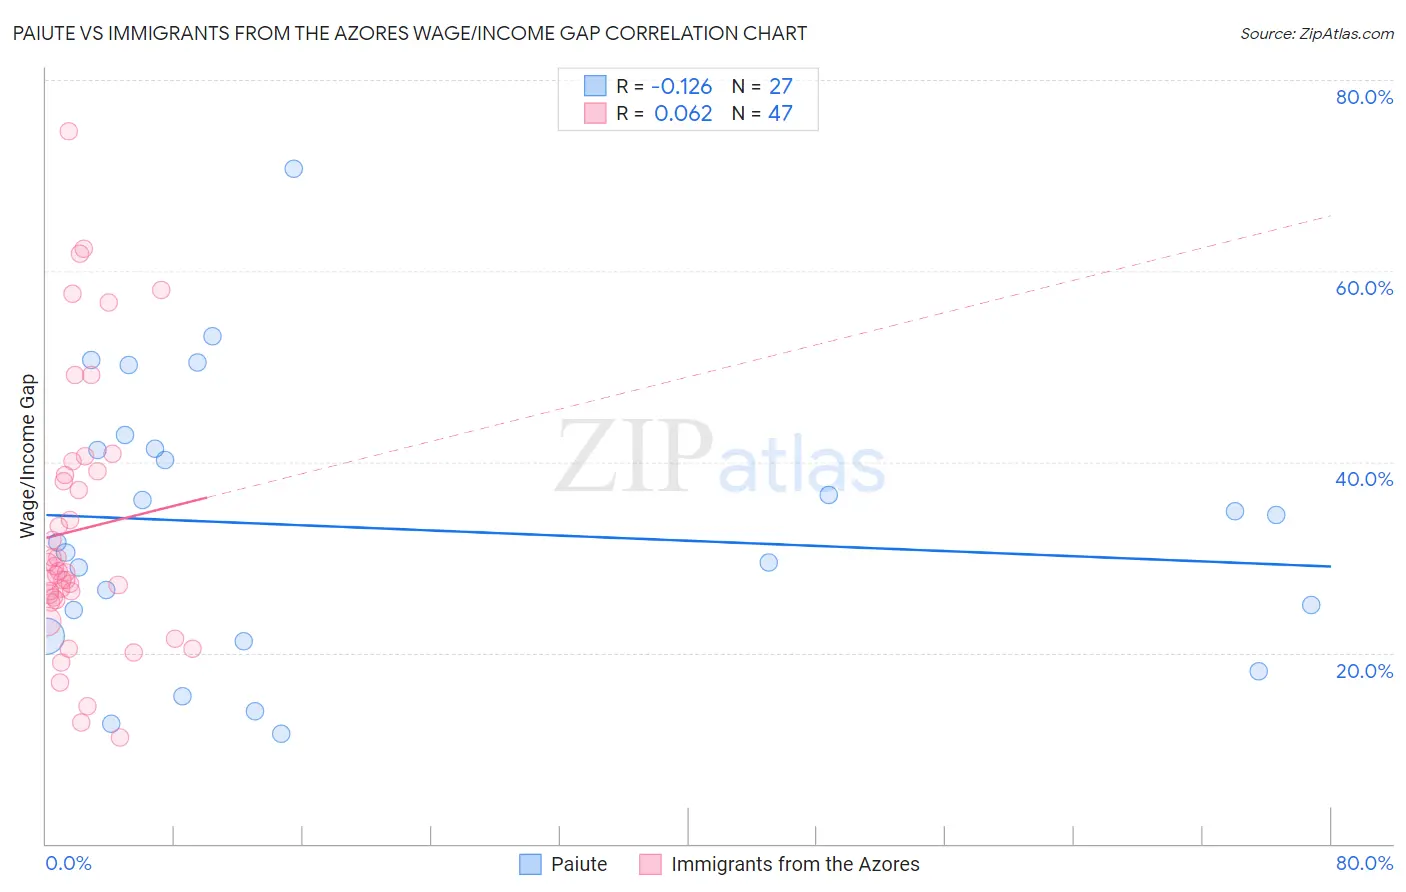 Paiute vs Immigrants from the Azores Wage/Income Gap